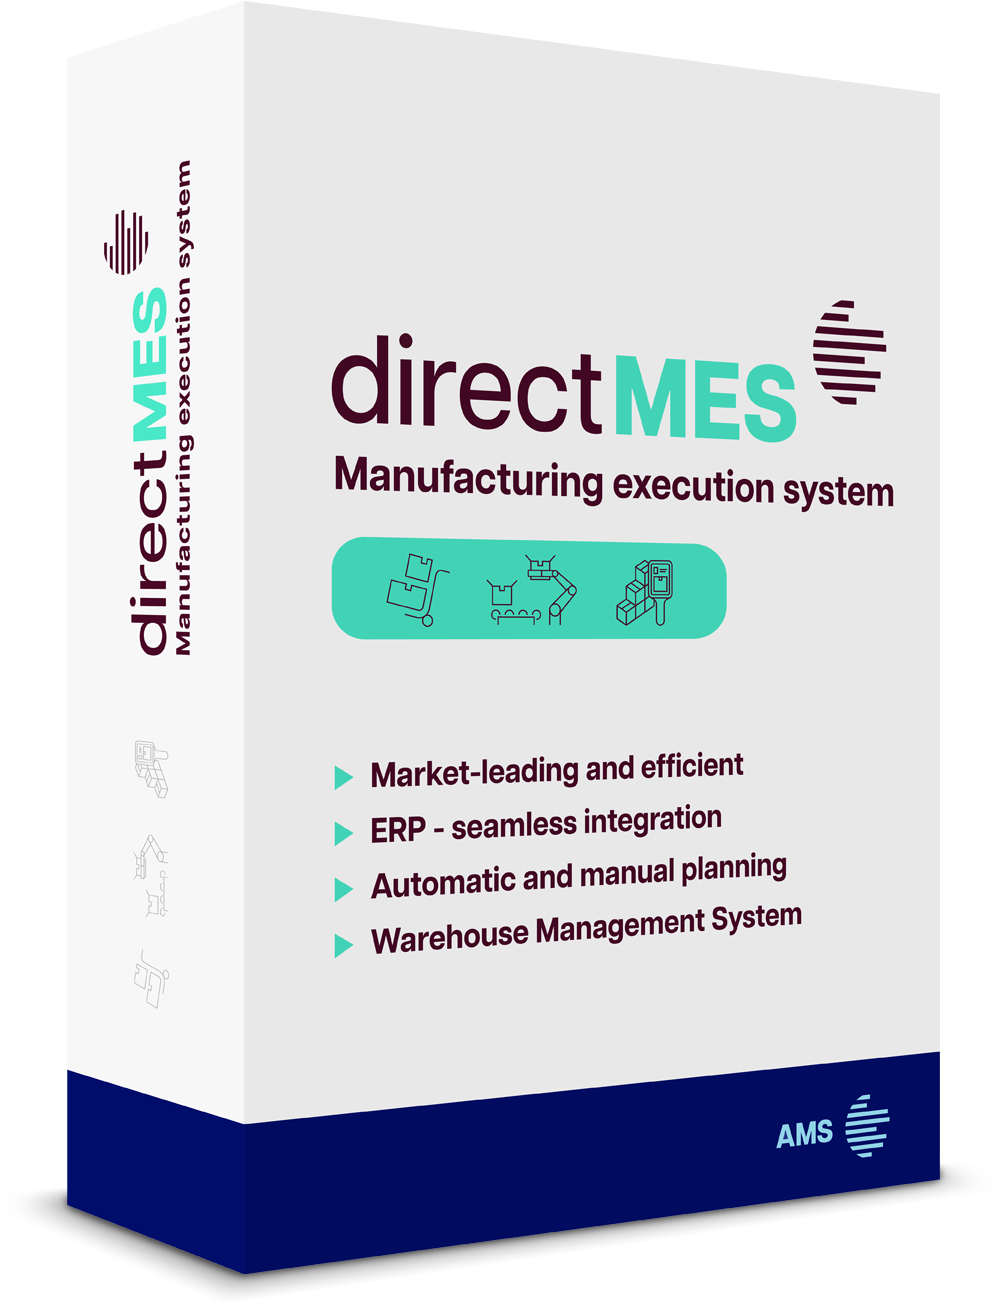 direct MES Manufacturing Execution System from AMS is developed through 35 years of experience in the manufacturing industry worldwide. Integrated with your ERP system, our modern market-leading MES platform provides you with a total solution, enabling you to further develop and streamline your manufacturing business.